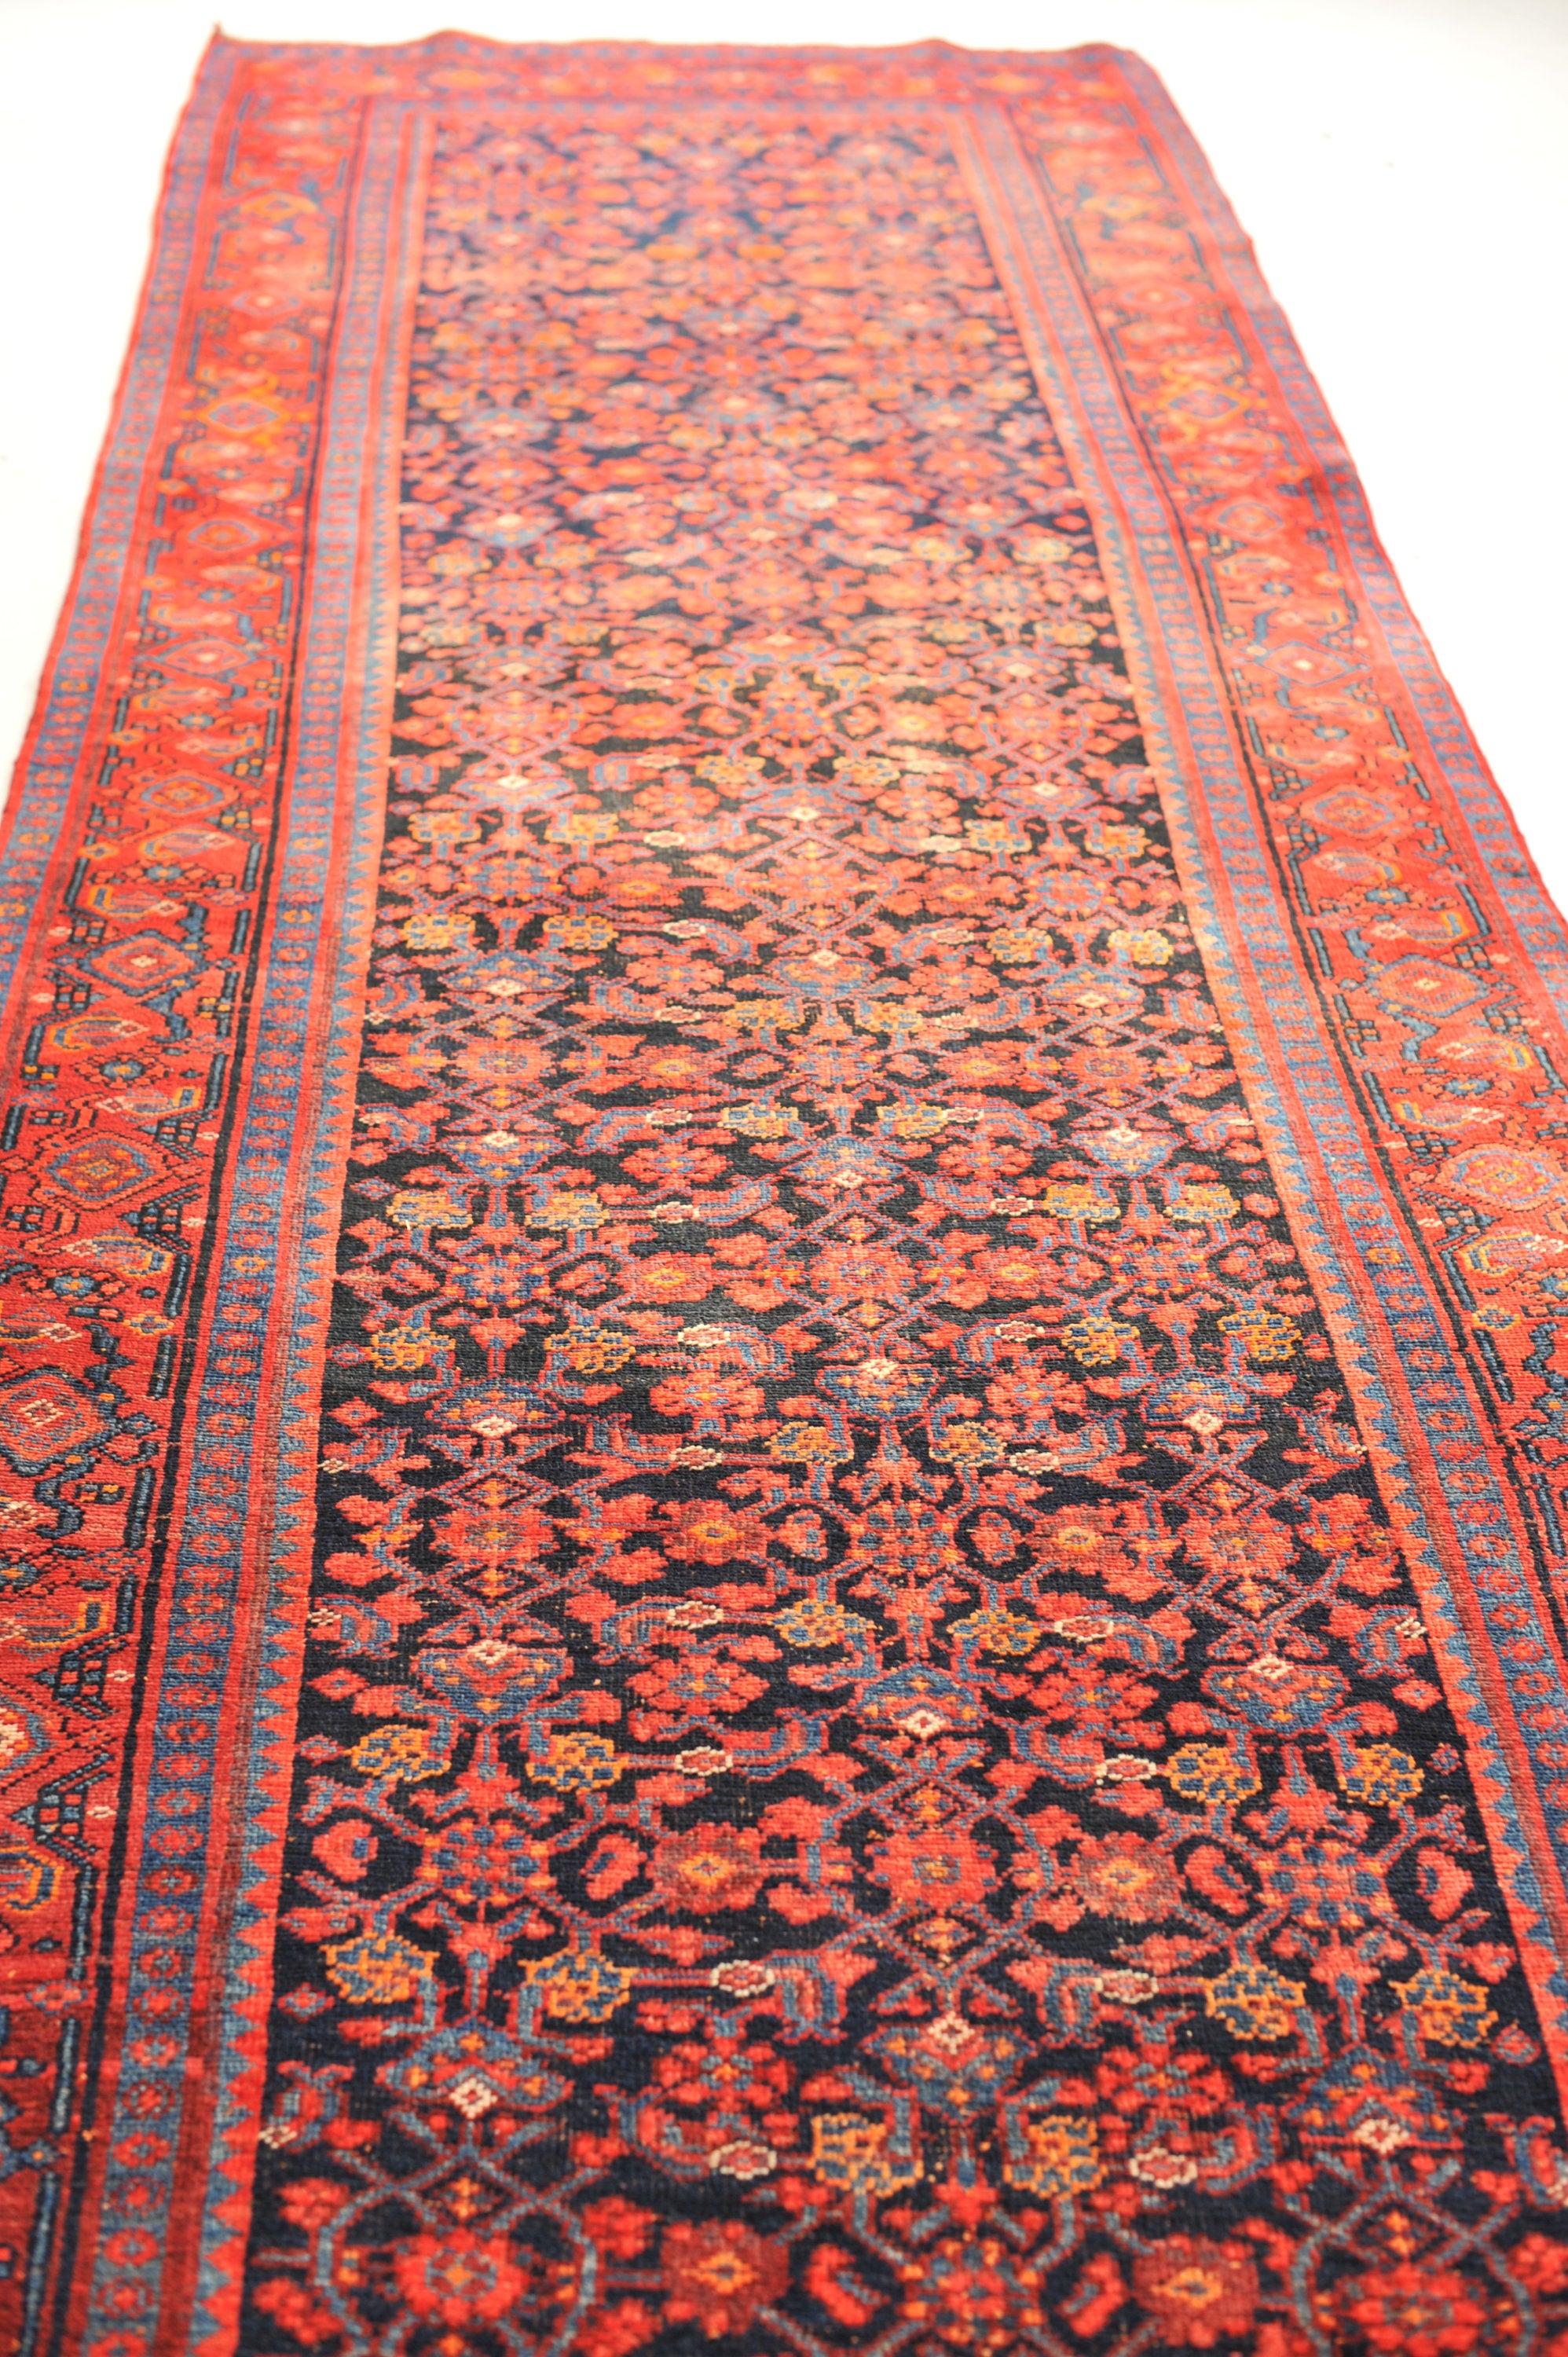 Wide Vintage Runner with Fruit Punch and Charcoal-Indigo-Black Design All-over For Sale 4